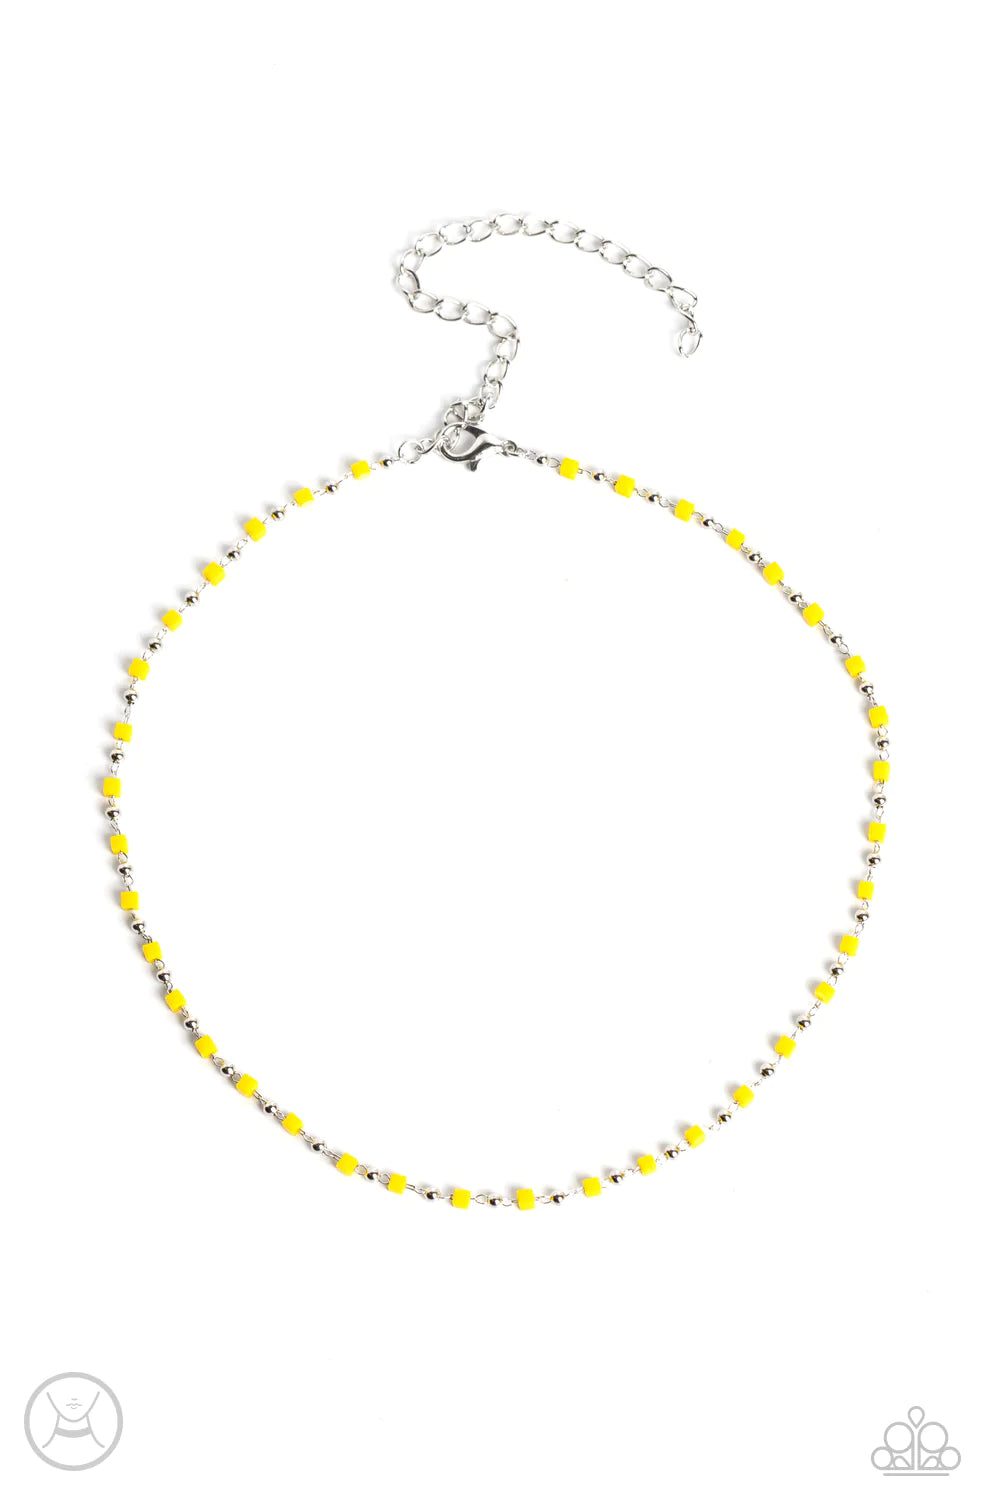 Paparazzi Accessories Neon Lights - Yellow Dainty silver beads and square Samoan Sun beads delicately link around the neck, creating a minimalist inspired bright pop of color. Features an adjustable clasp closure. Sold as one individual choker necklace. I